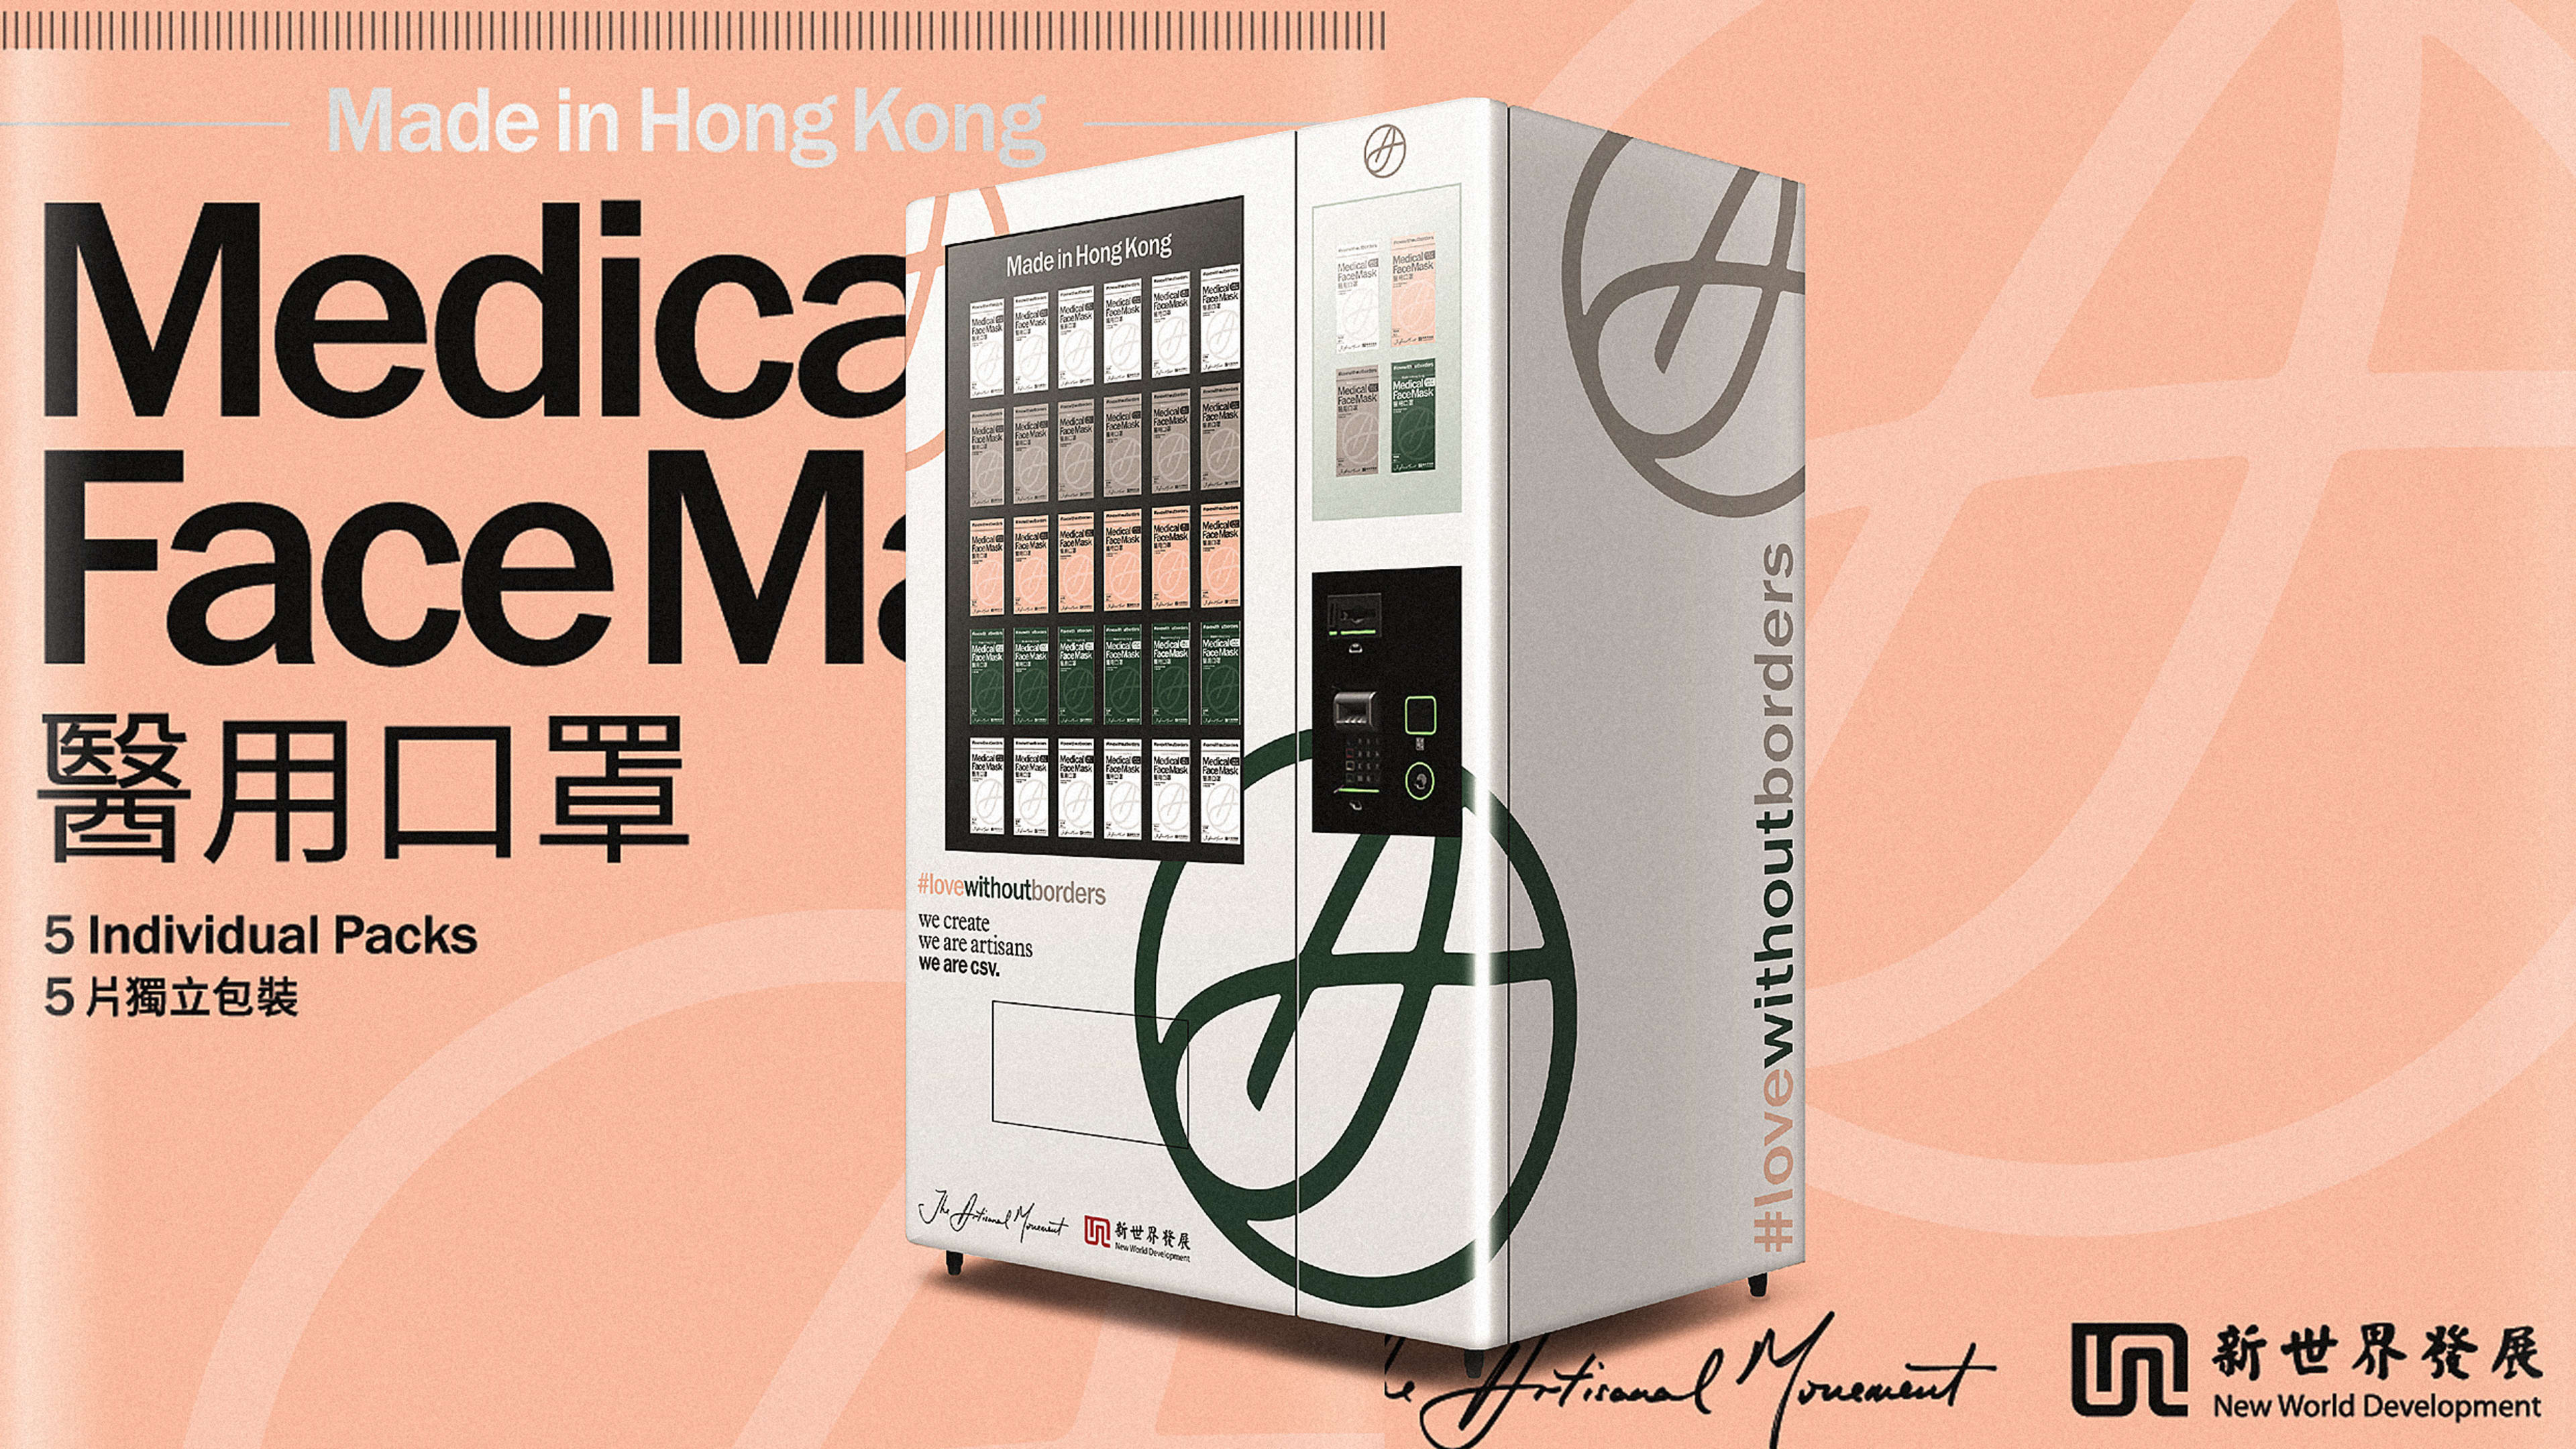 These new vending machines in Hong Kong offer free medical-grade masks to people in need